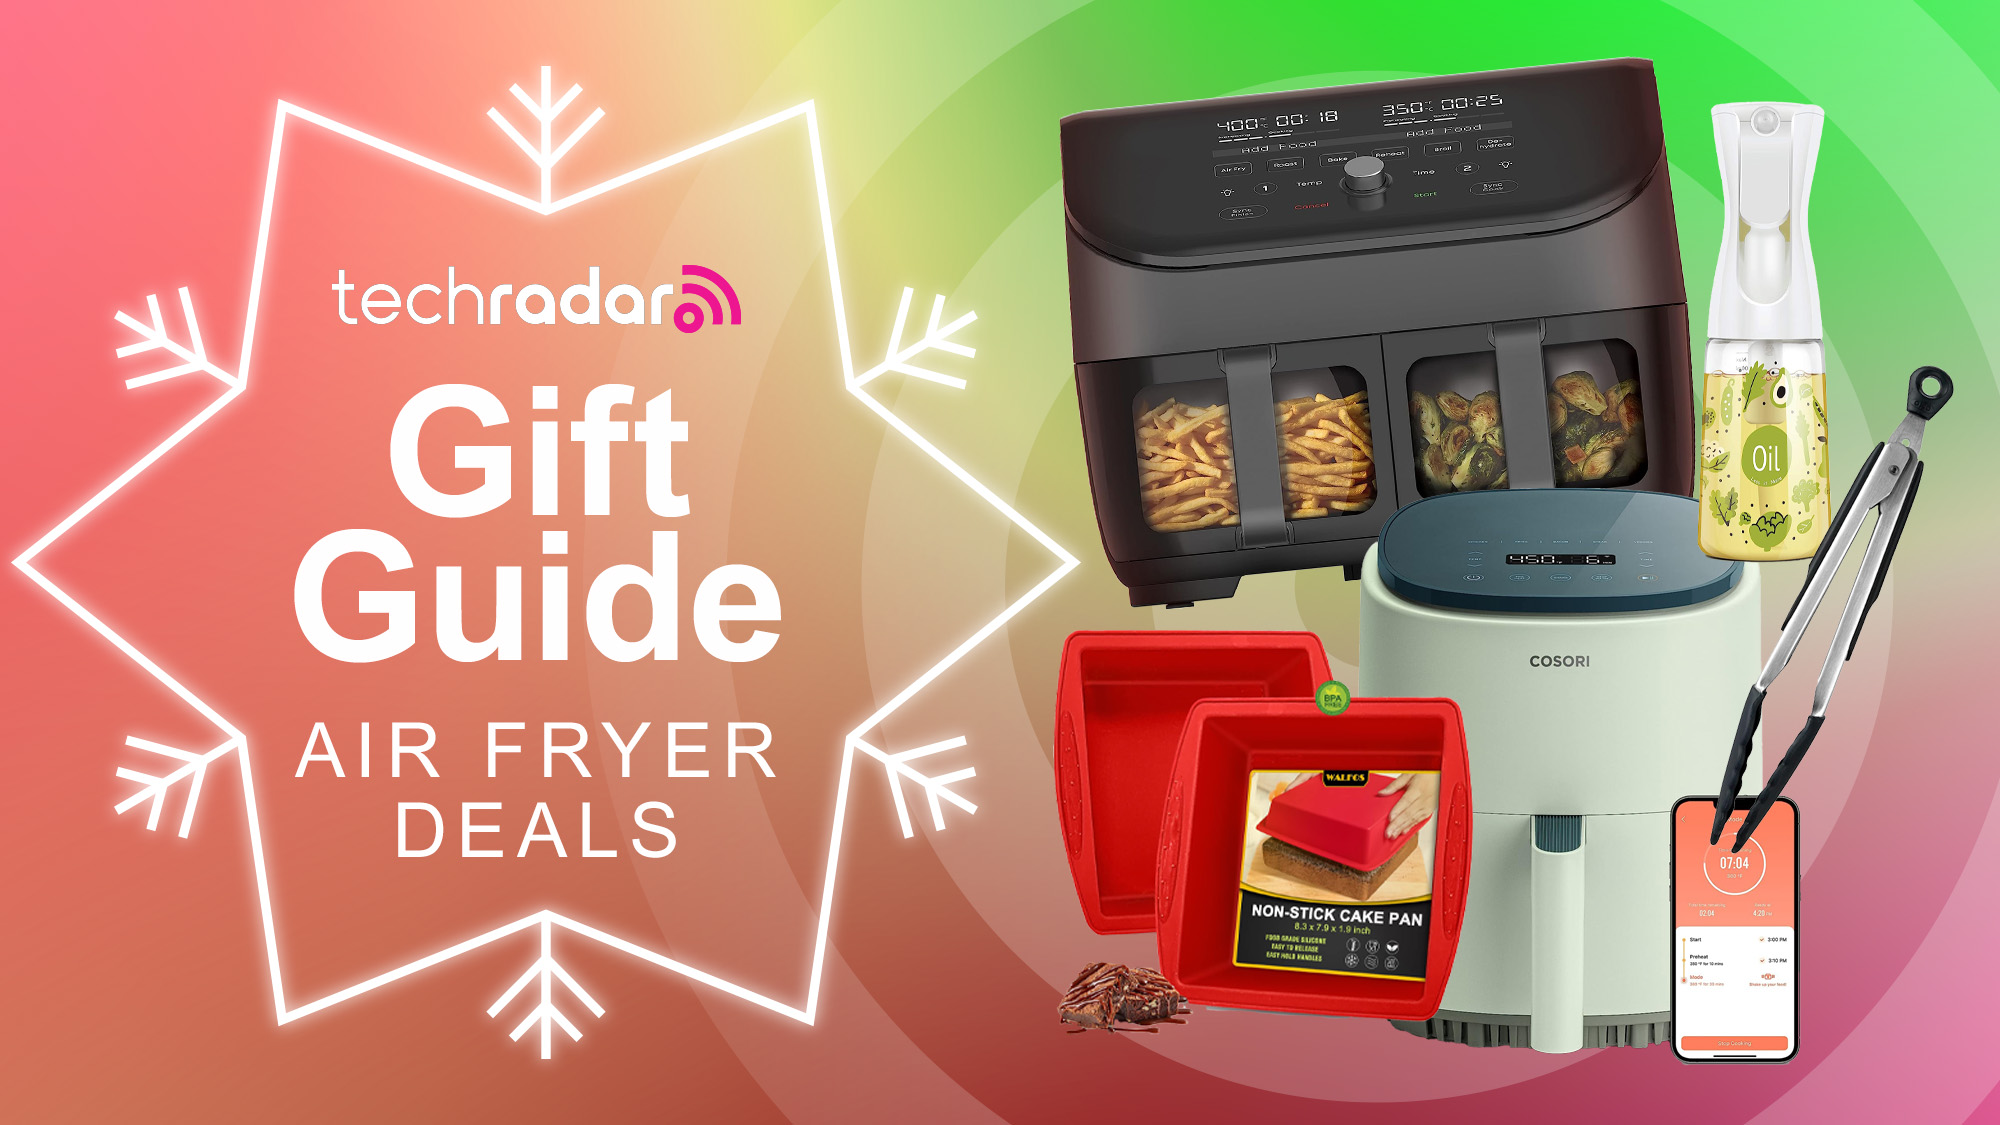 6 air fryer gifts to make the holidays easier and tastier | TechRadar